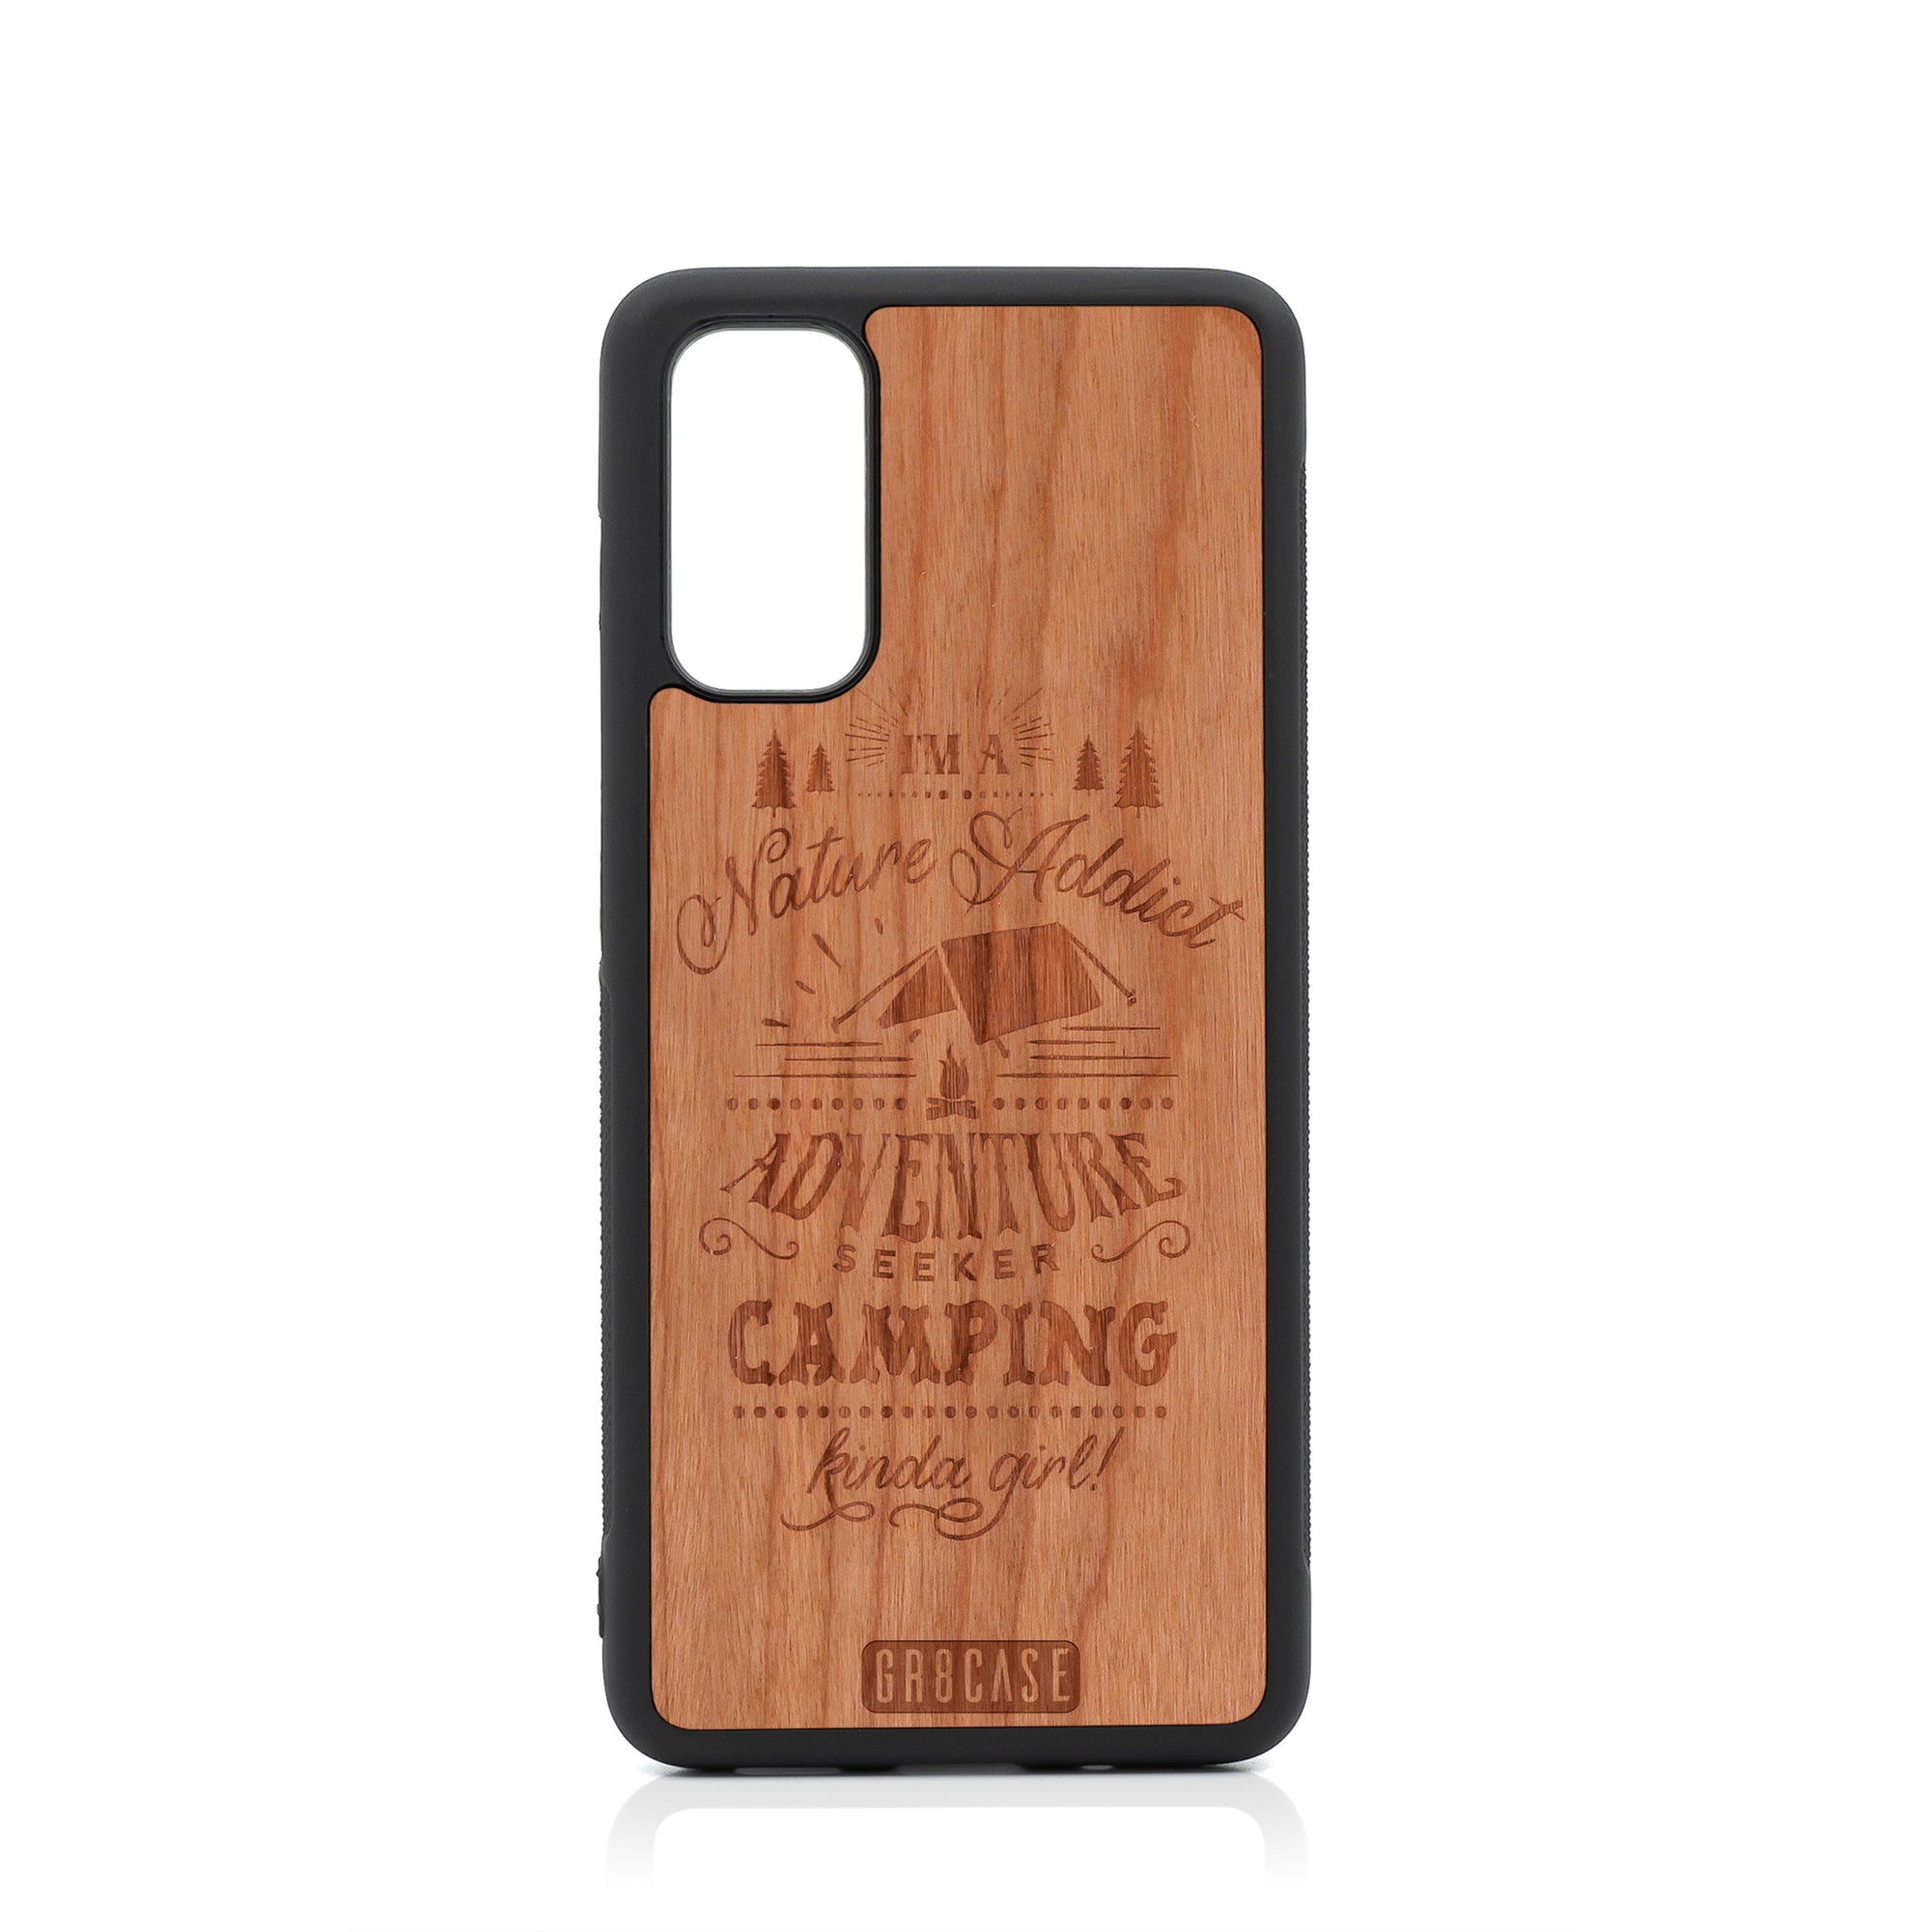 I'm A Nature Addict Adventure Seeker Camping Kinda Girl Design Wood Case For Samsung Galaxy S20 by GR8CASE